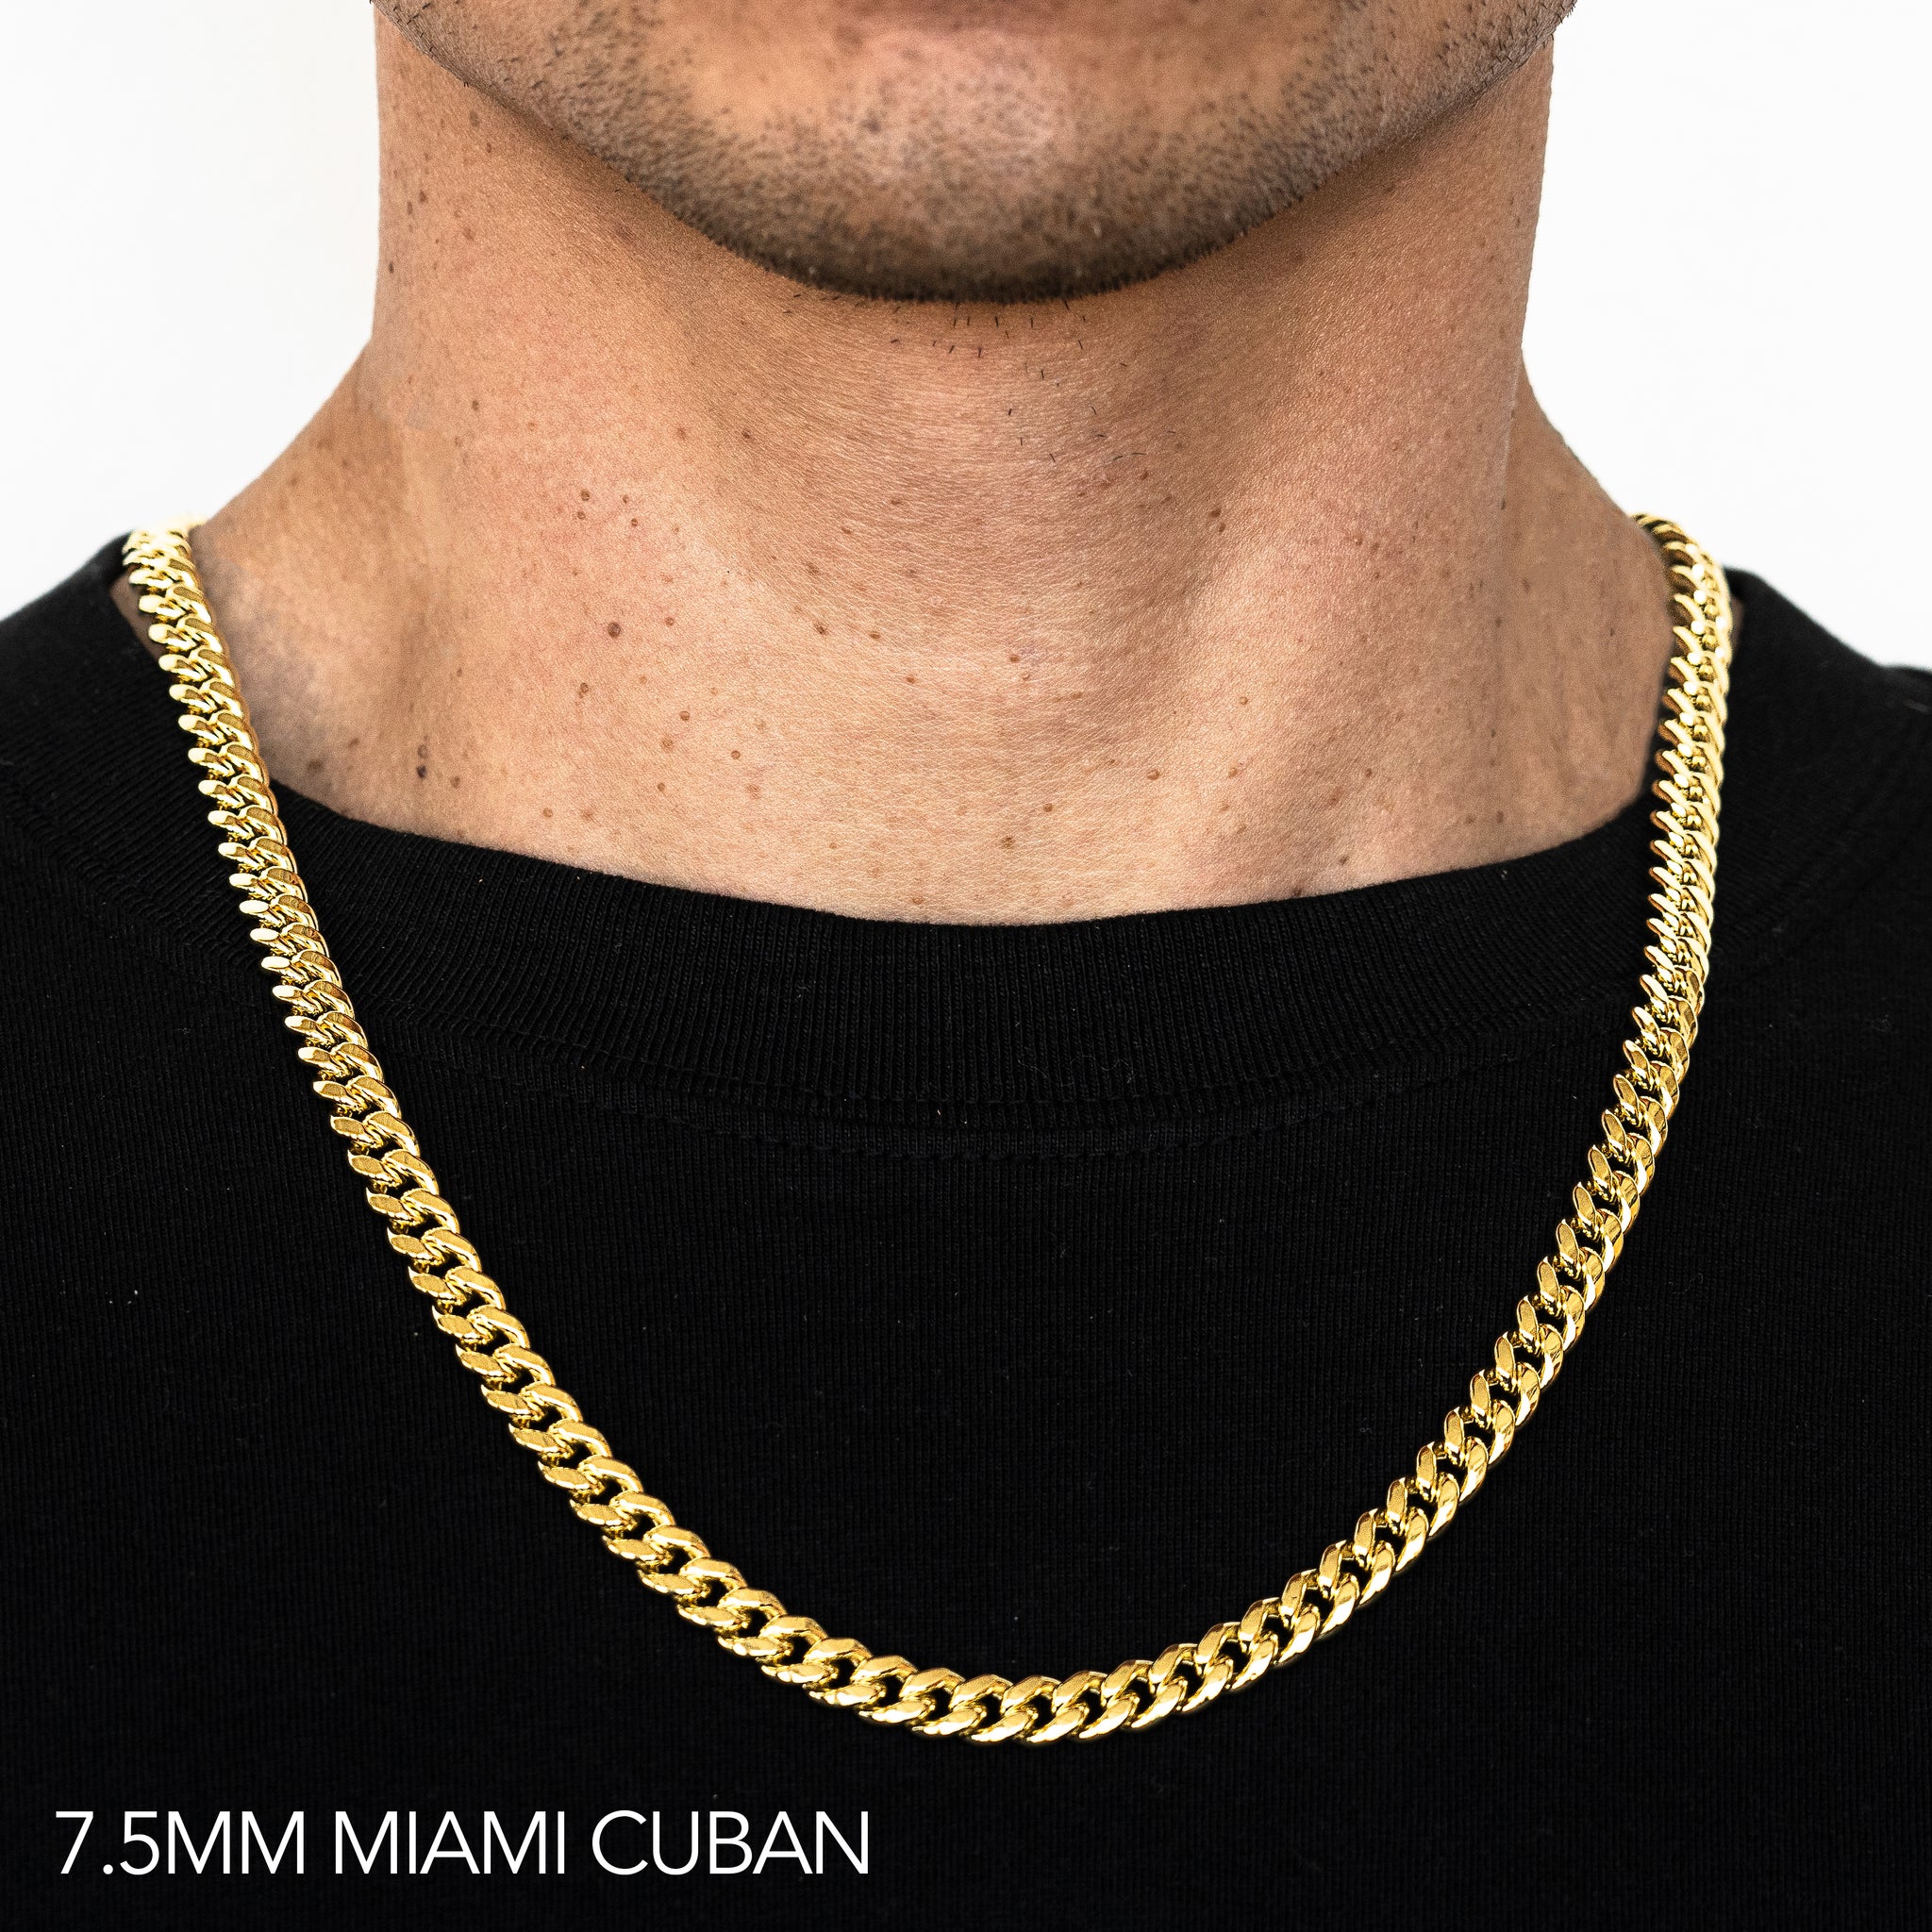 14K 7.5MM YELLOW GOLD HOLLOW MIAMI CUBAN 22 CHAIN NECKLACE"